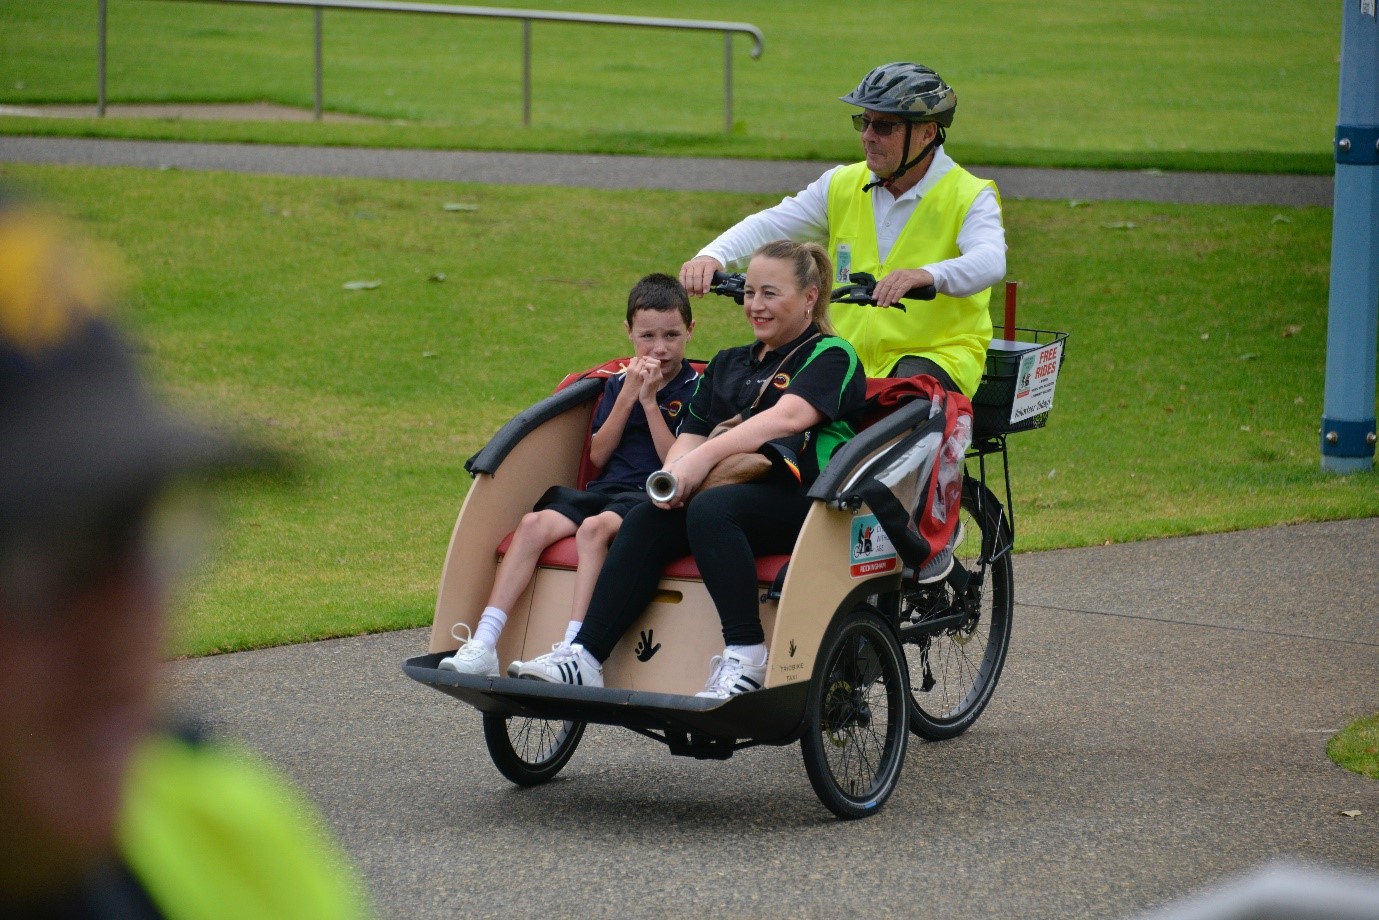 Person giving two people a ride outdoors in a trishaw bicycle.